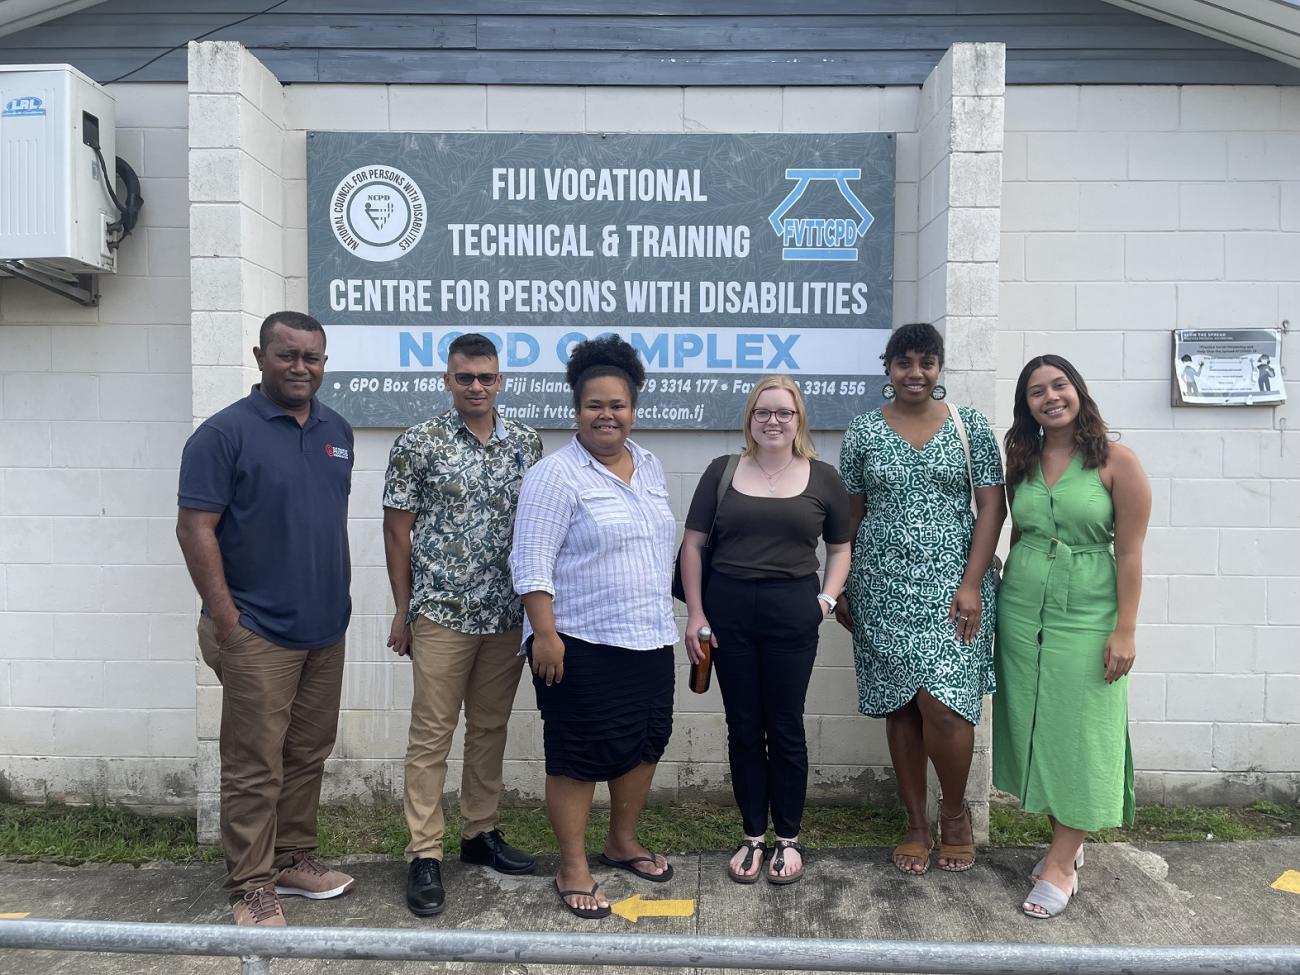 Members of the Pacific UN Communications Group and the Pacific Disability Forum pose for a photo following a field trip to the Fiji Vocational Technical and Training Centre for Persons with Disabilities.  